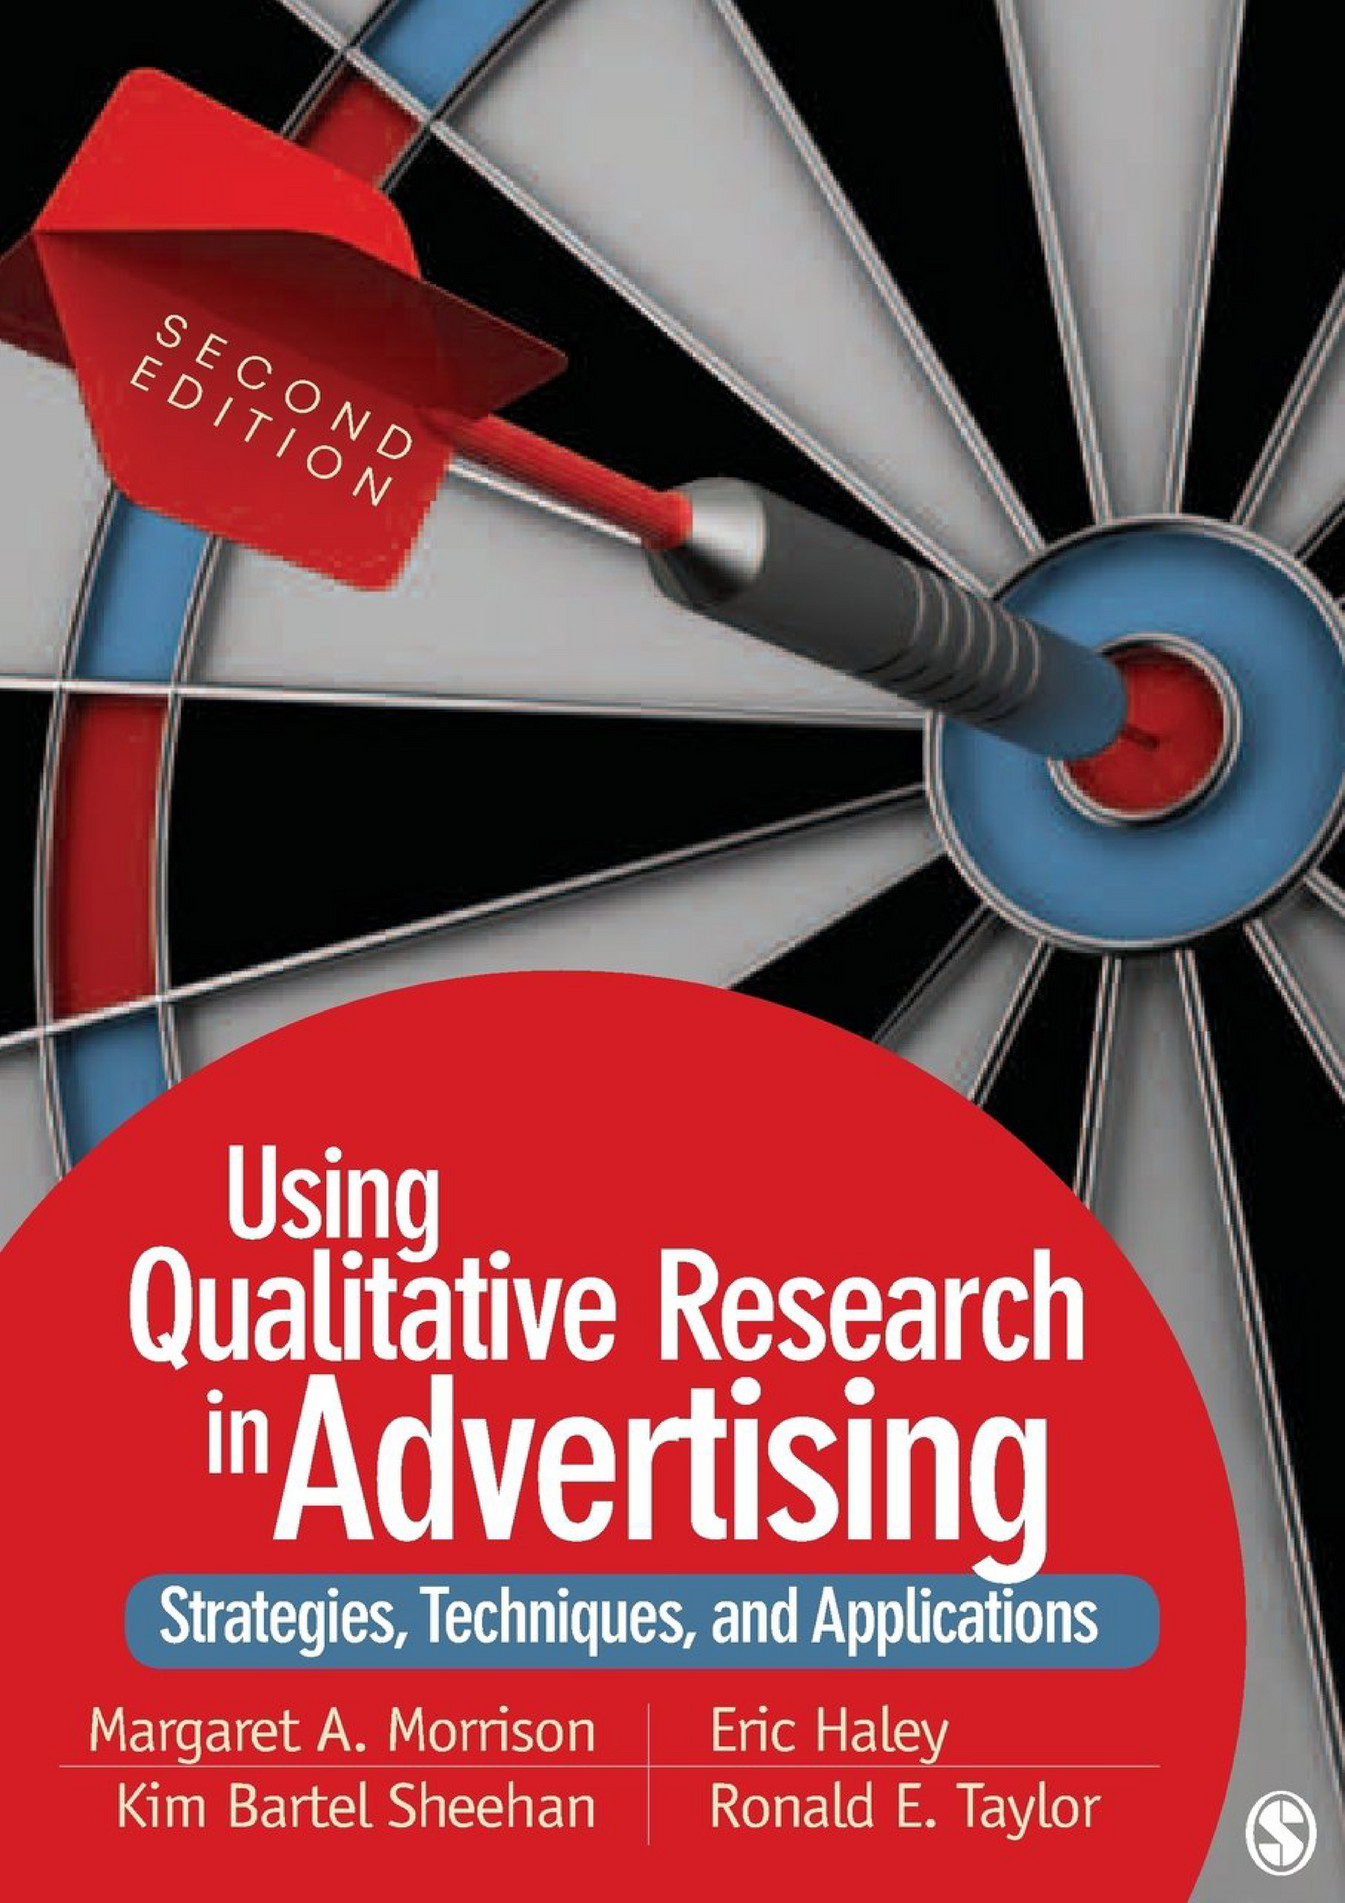 effective advertising research paper